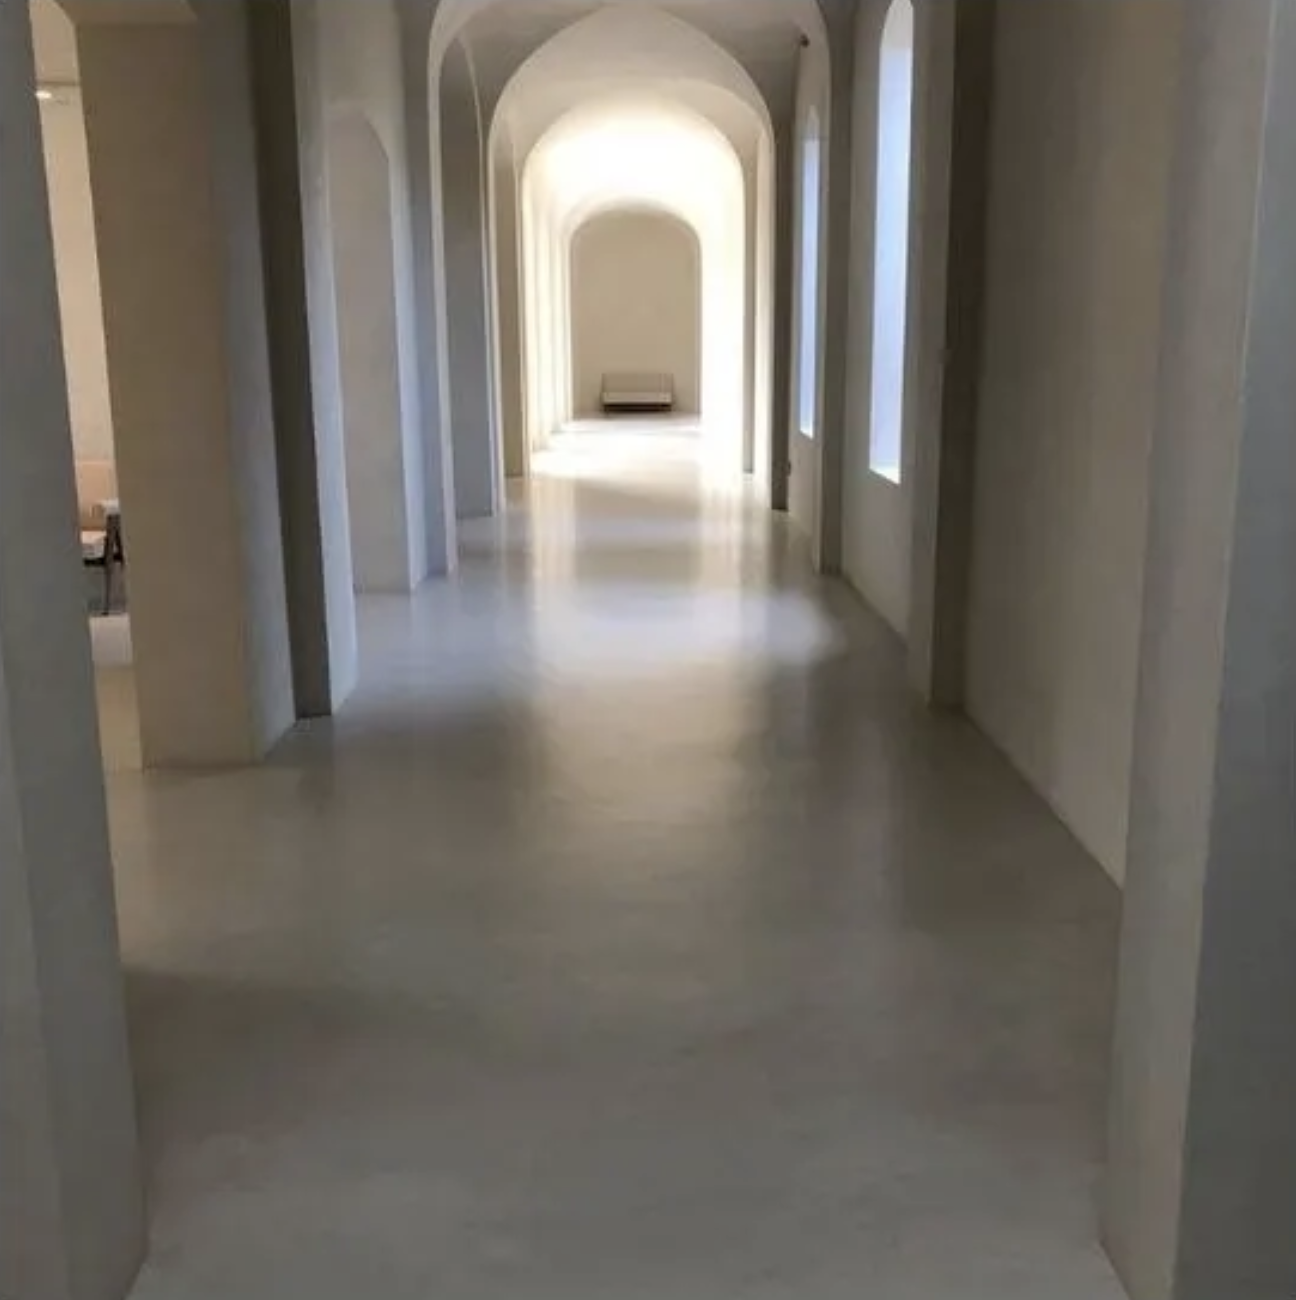 the hallway is absolutely bare and the chandelier is gone